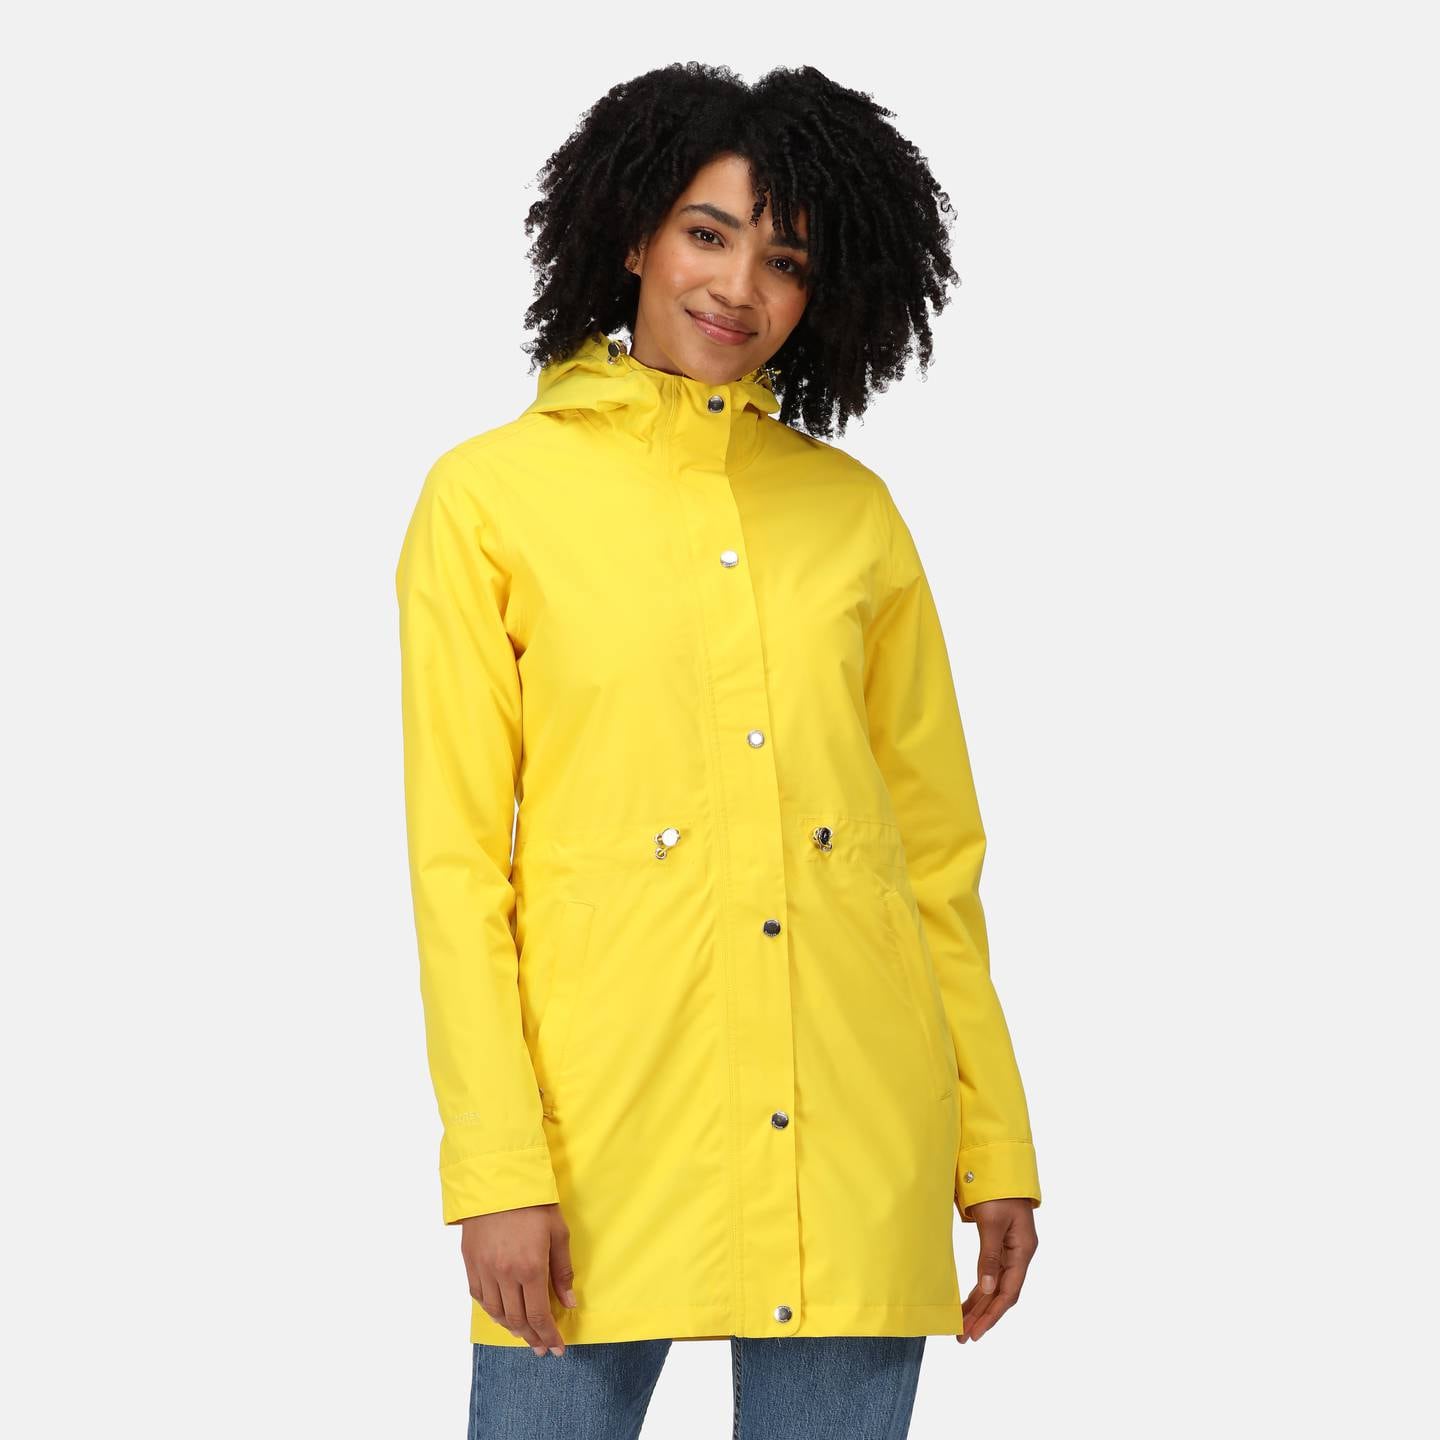 10 of the best raincoats to beat the autumn showers – The Irish Times